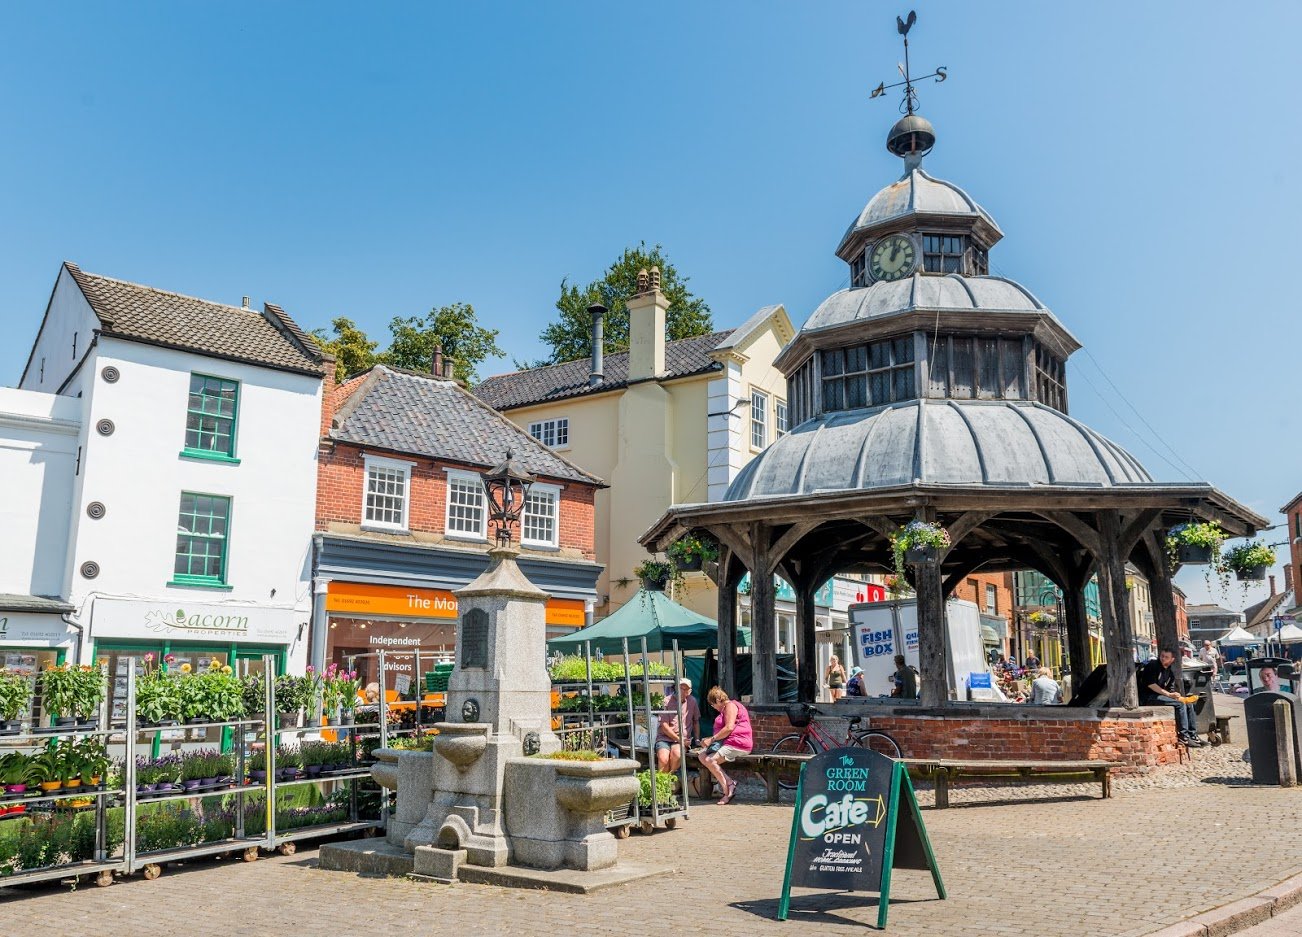 A market place with a market cross covered with a cupola, with historic buildings in use as shops in the background.